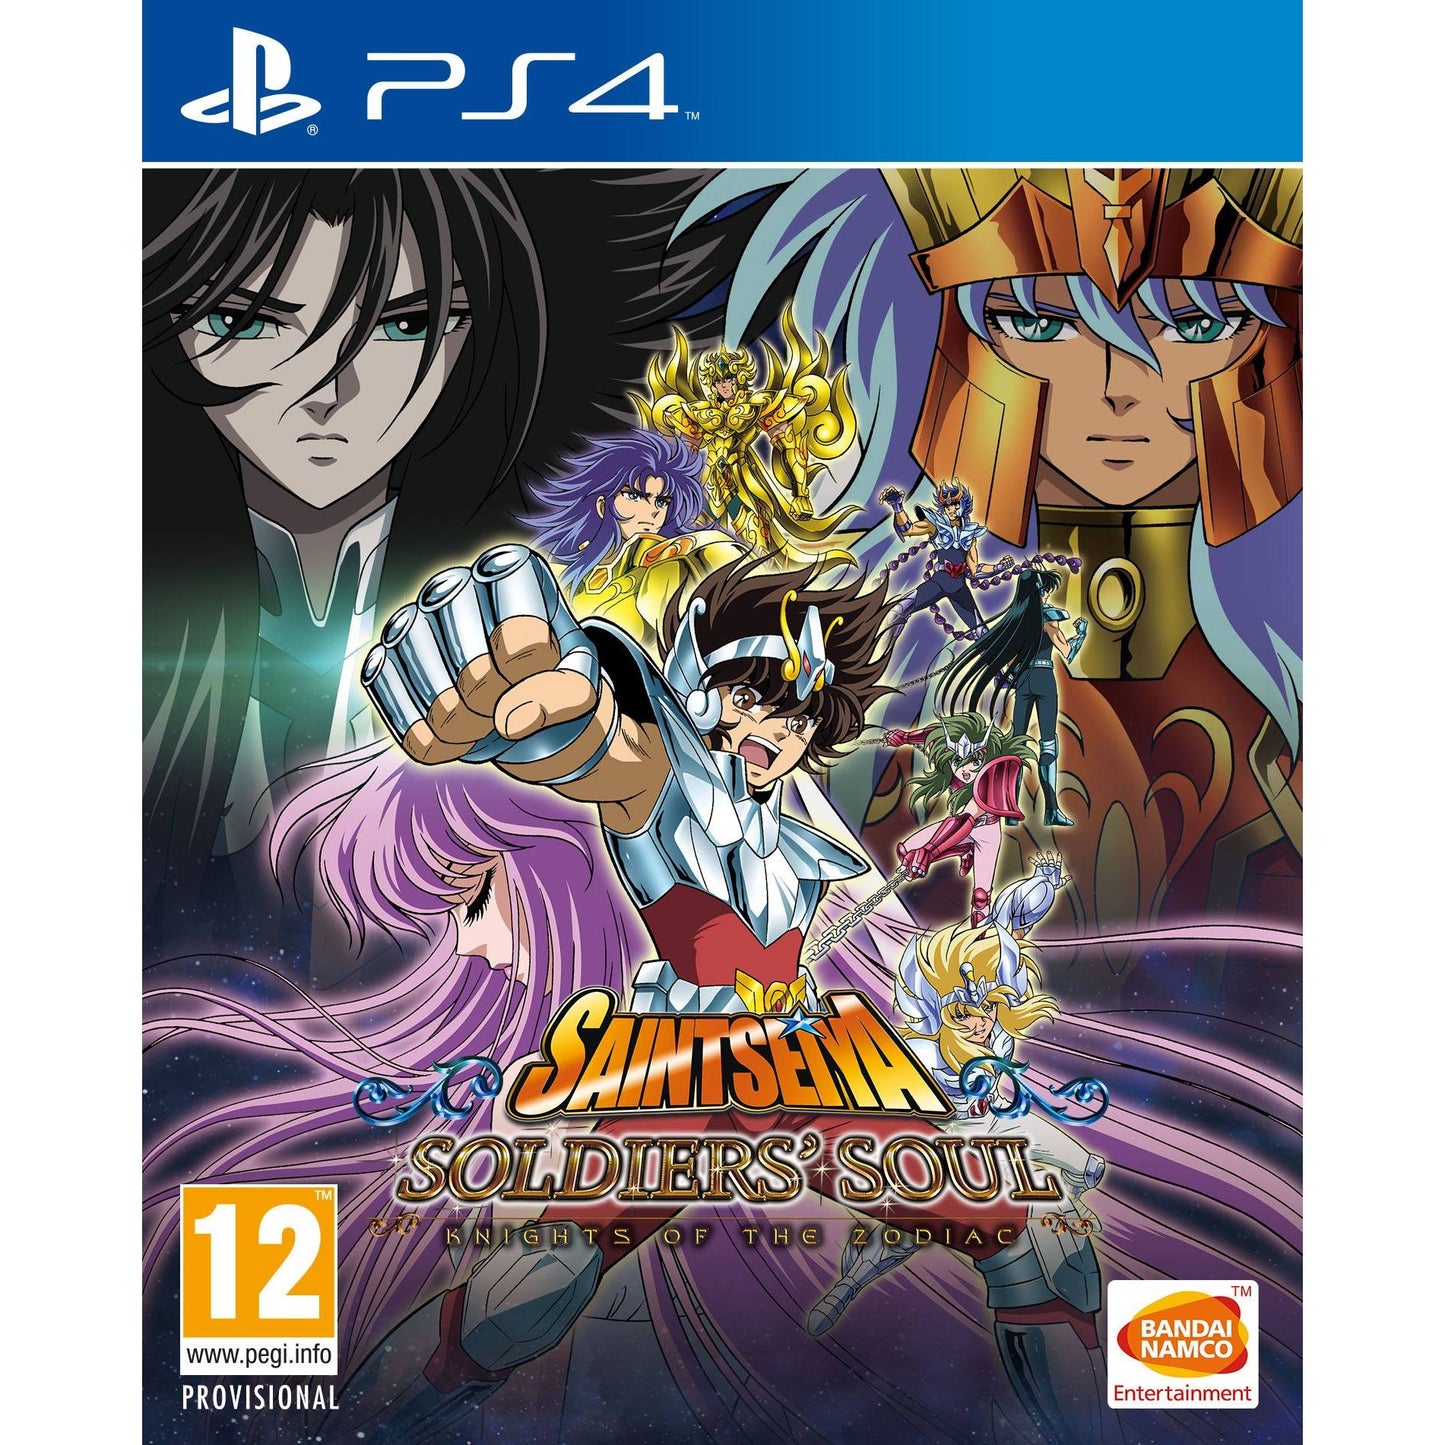 Saint Seiya: Soldiers' Soul PS4, caballeros del zodiaco ps4